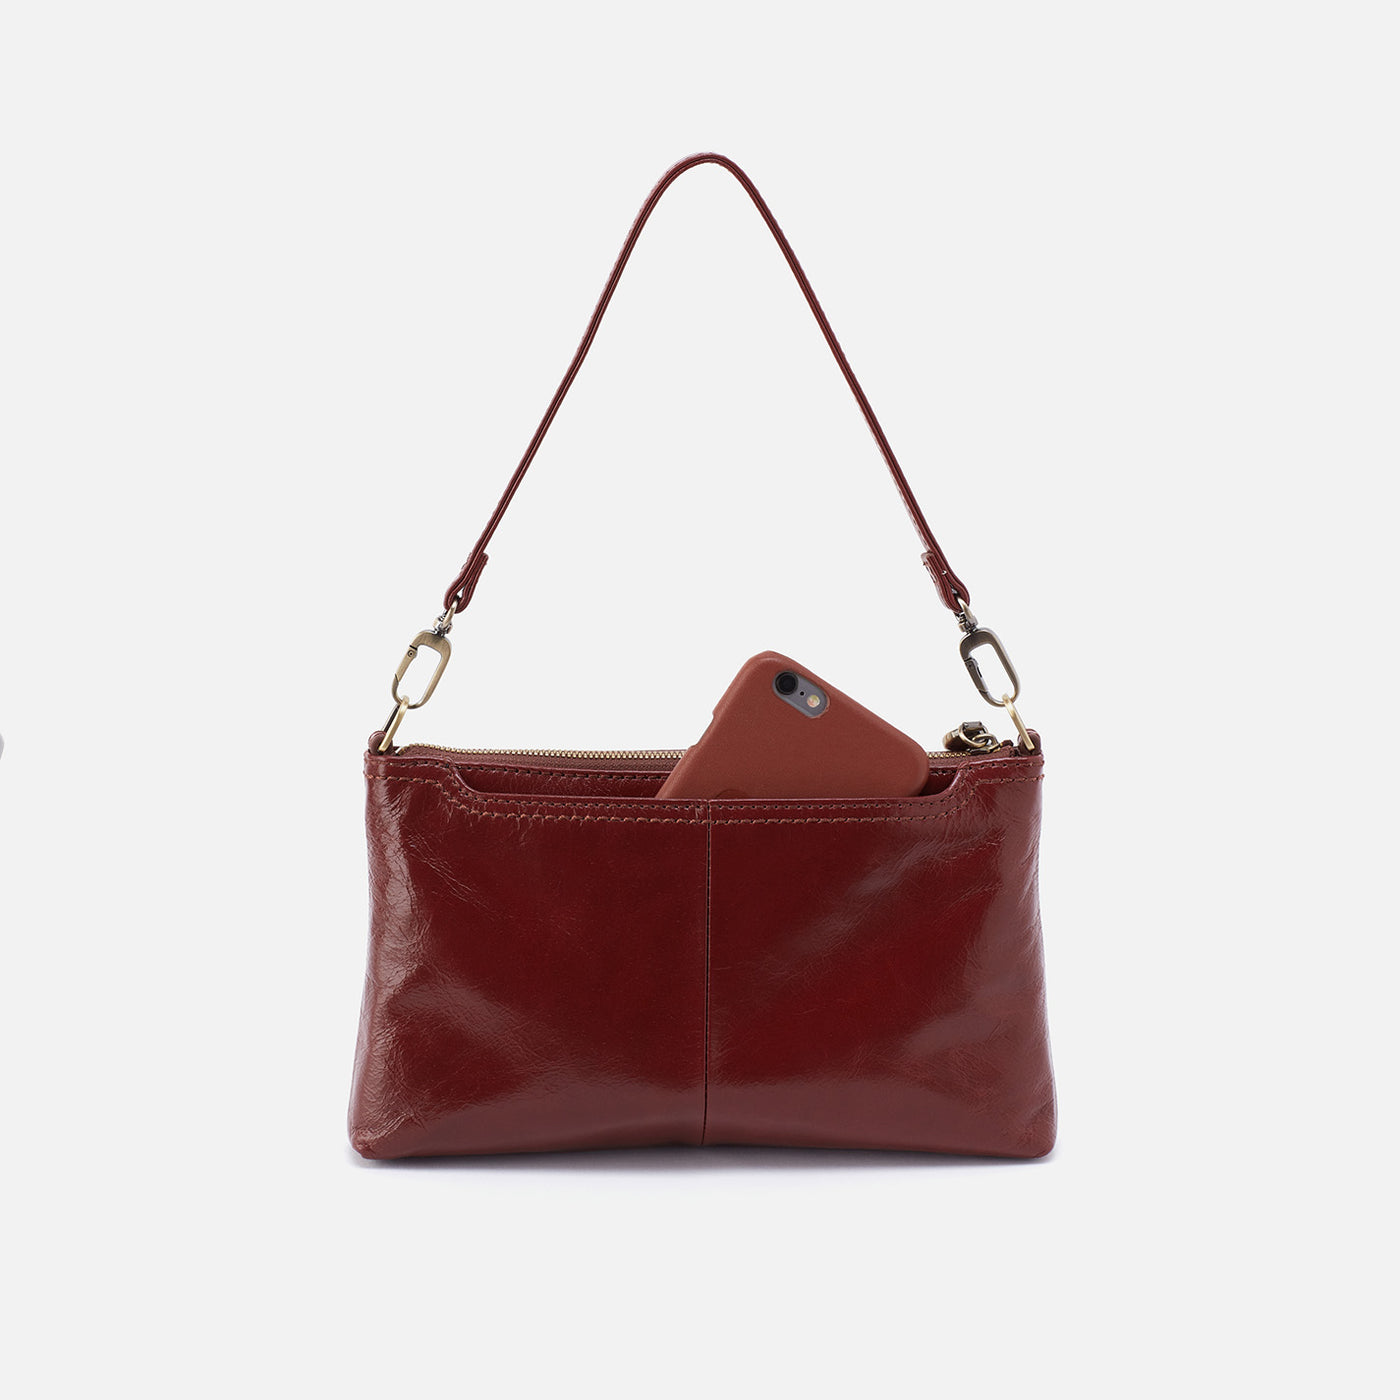 Darcy Crossbody in Polished Leather - Henna